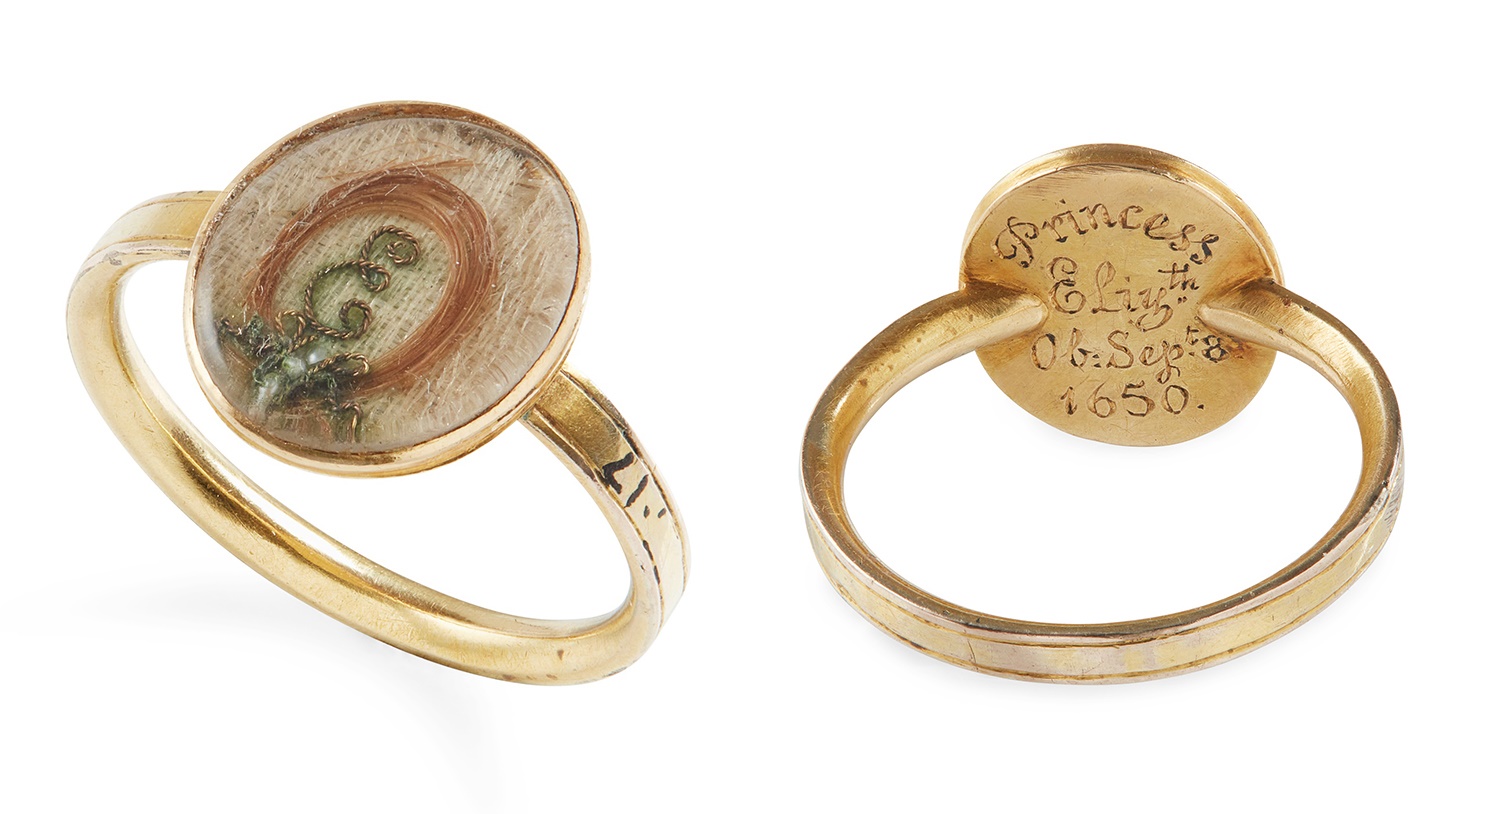  A ‘STUART CRYSTAL’ GOLD AND HAIR MOUNTED MEMORIAL RING